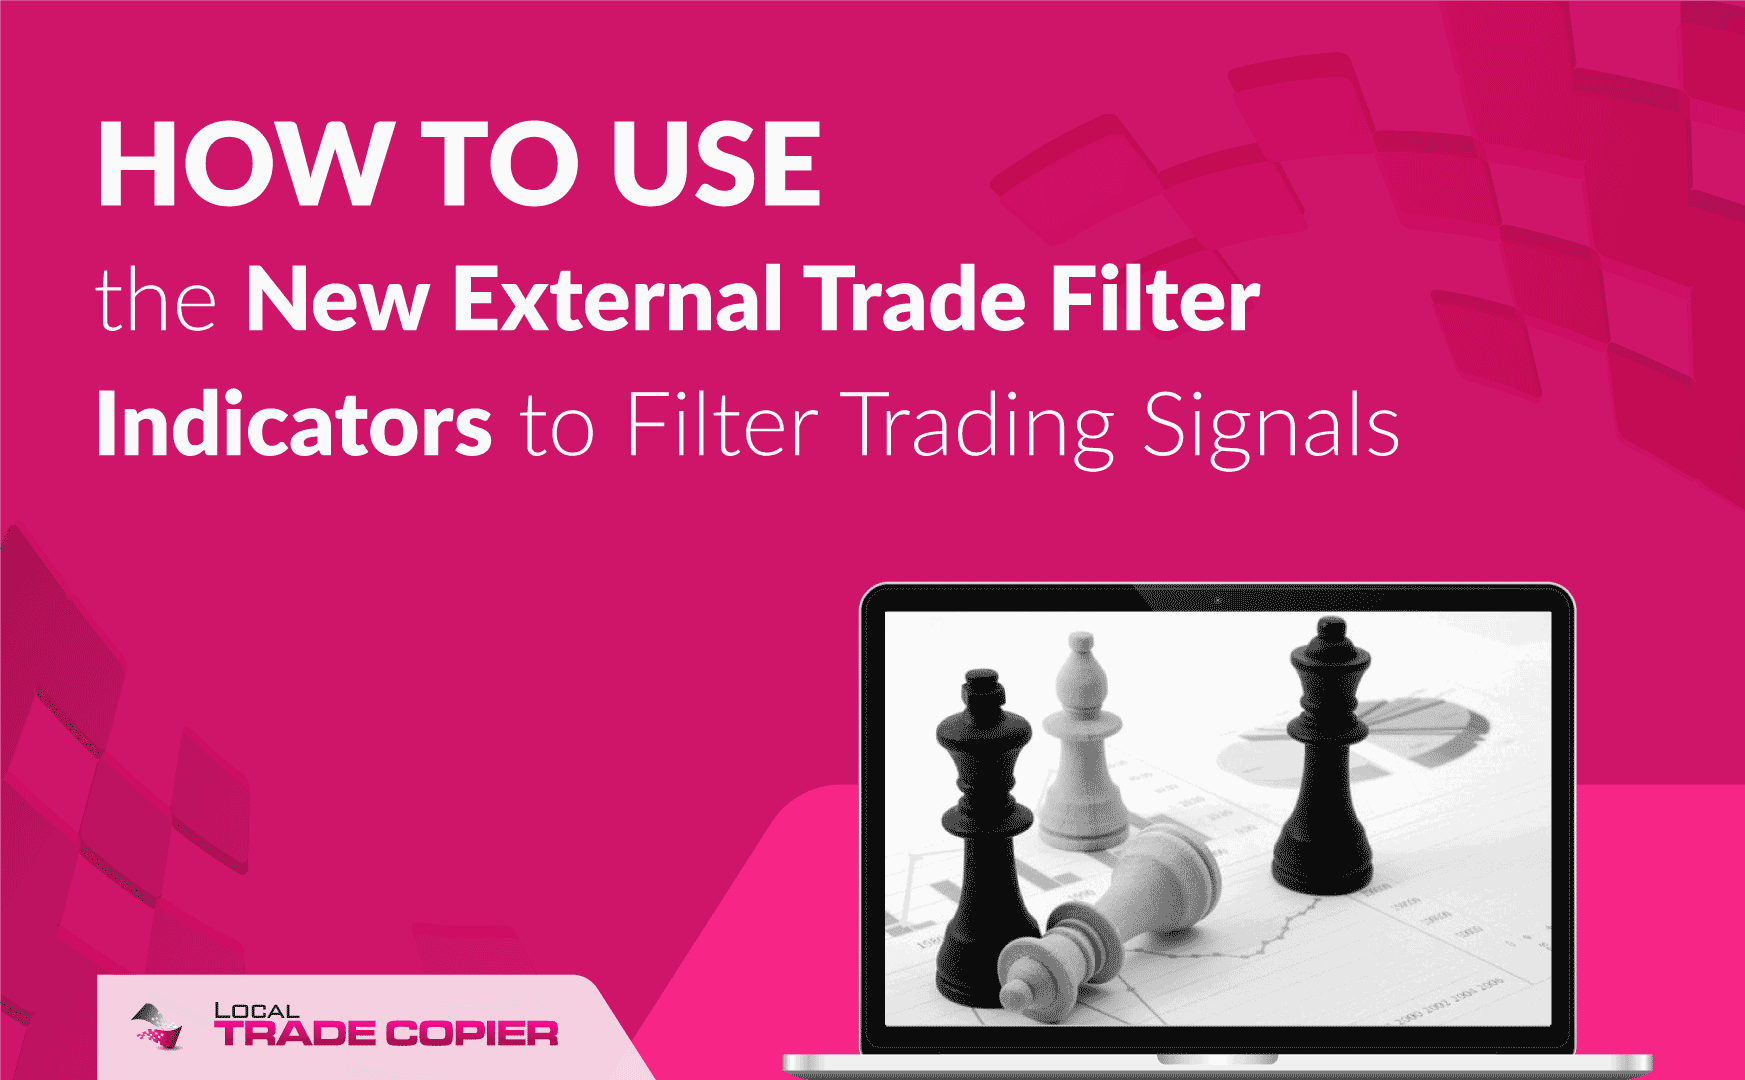 Local-Trade-Copier-Tutorials-how-to-use-the-new-external-trade-filter-indicators-to-filter-trading-signals-1745x1080